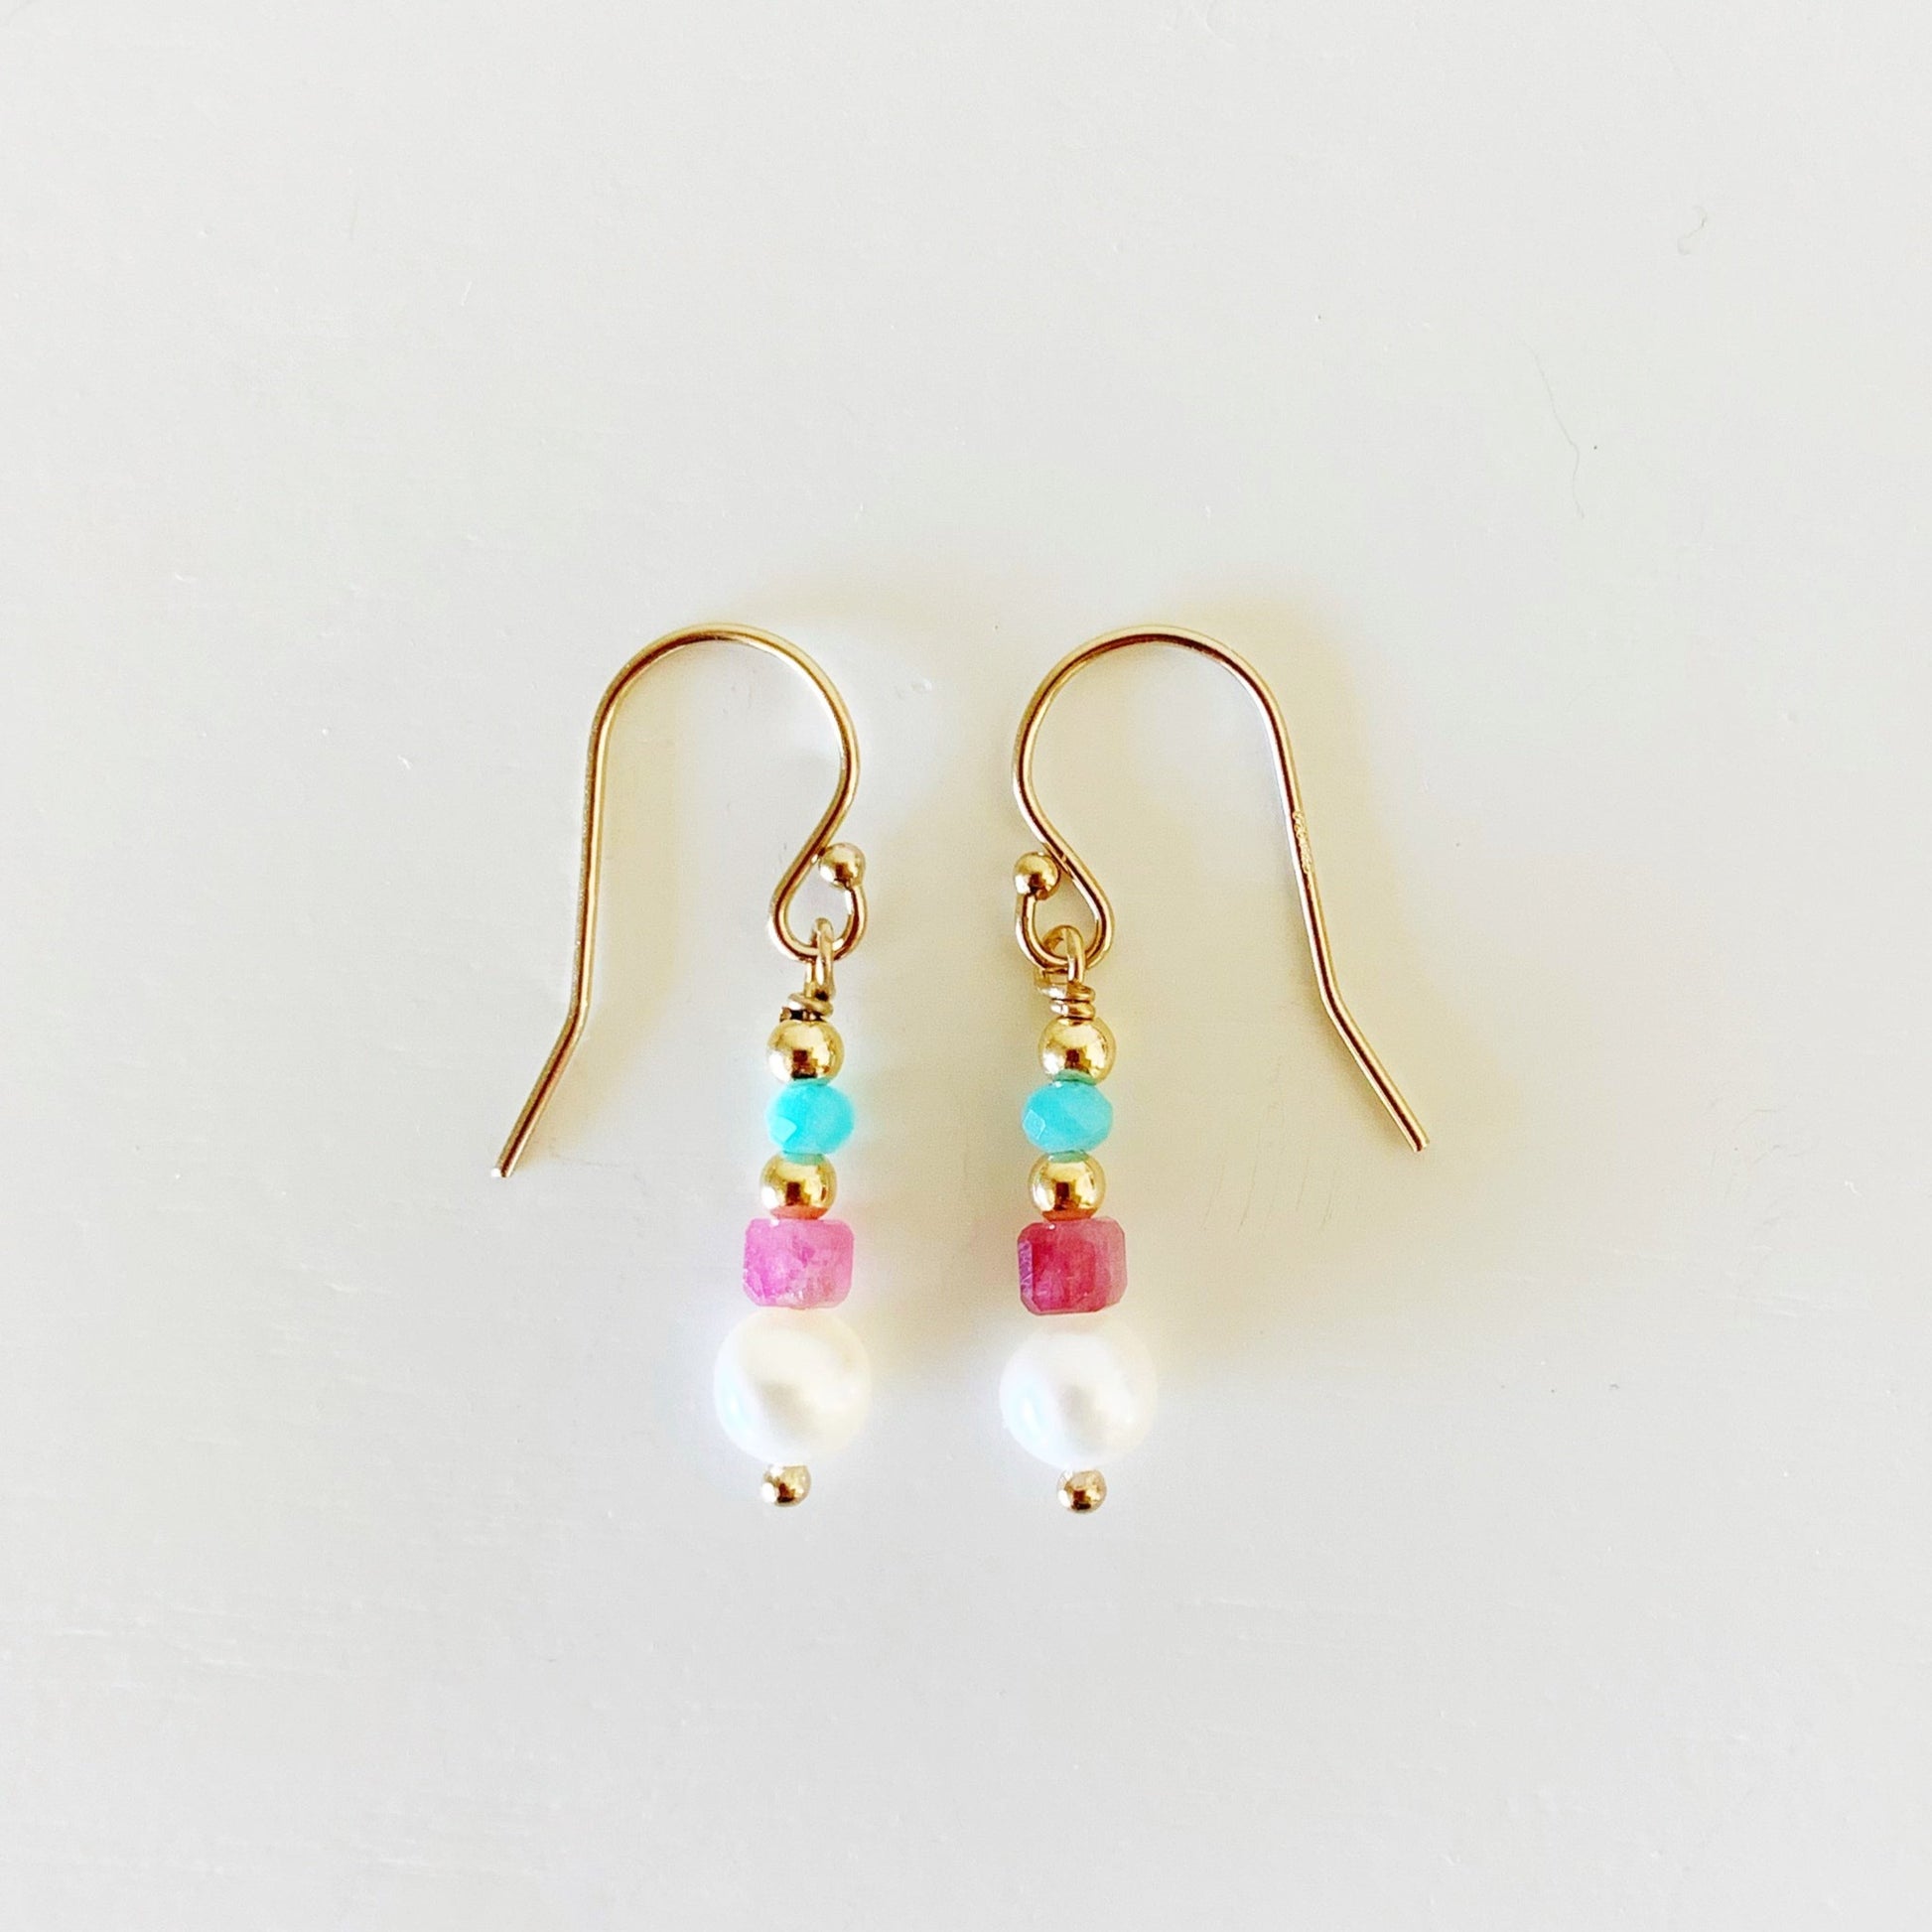 the harwich port earrings by mermaids and madeleines are petite linear earrings with freshwater pearls, faceted cube shaped pink tourmaline beads and bright microfaceted amazonite rondelles on 14k gold filled findings. this pair of earrings is photographed flat on a white surface